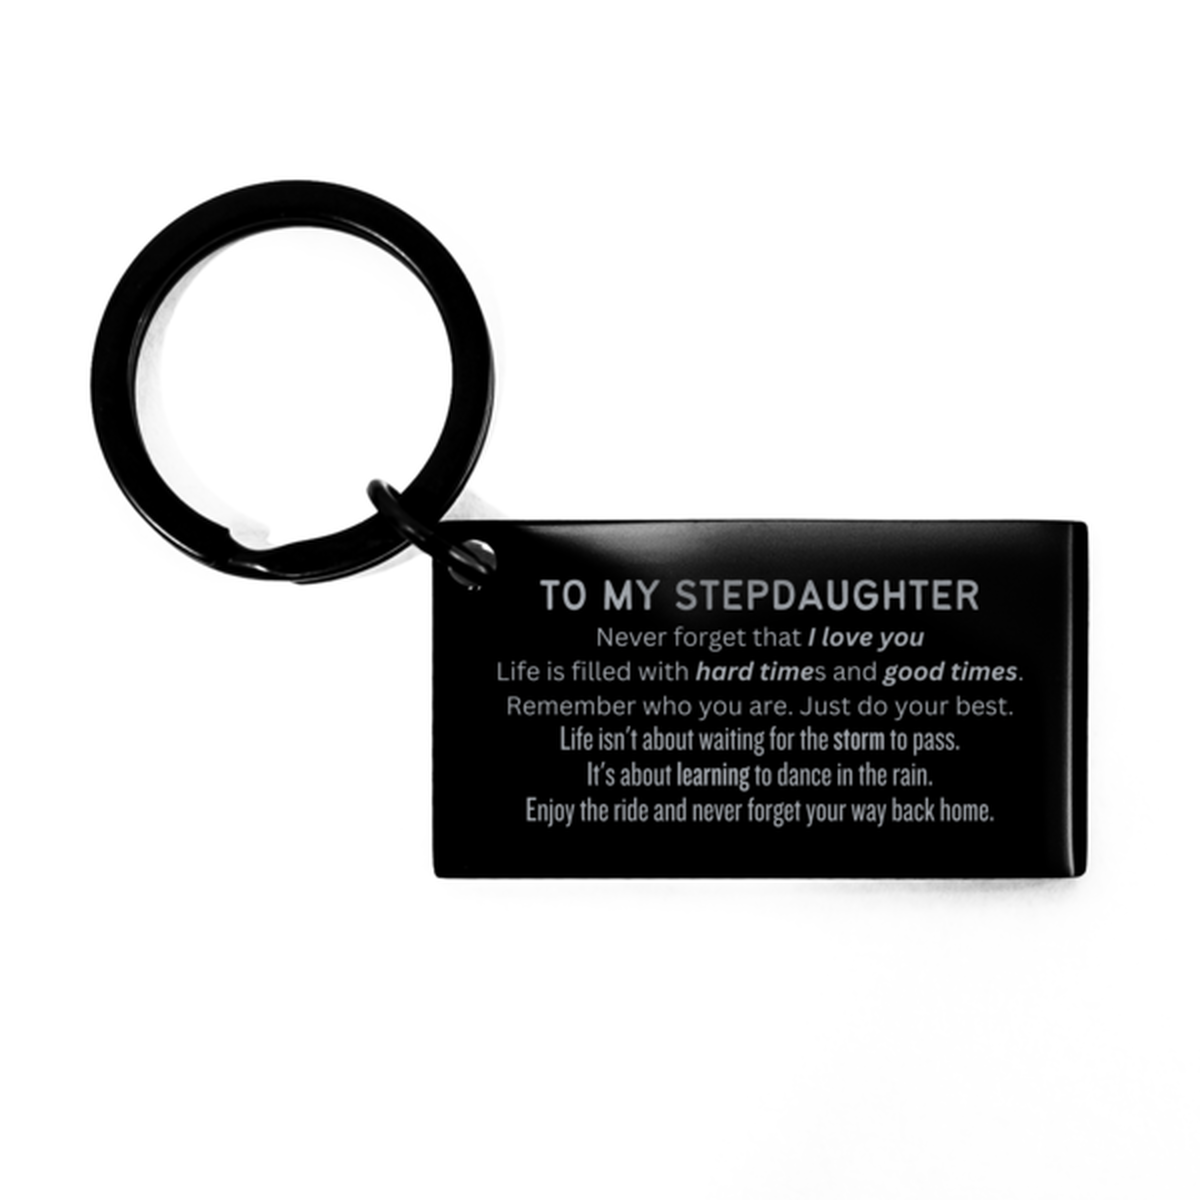 Christmas Stepdaughter Keychain Gifts, To My Stepdaughter Birthday Thank You Gifts For Stepdaughter, Graduation Unique Gifts For Stepdaughter To My Stepdaughter Never forget that I love you life is filled with hard times and good times. Remember who you a